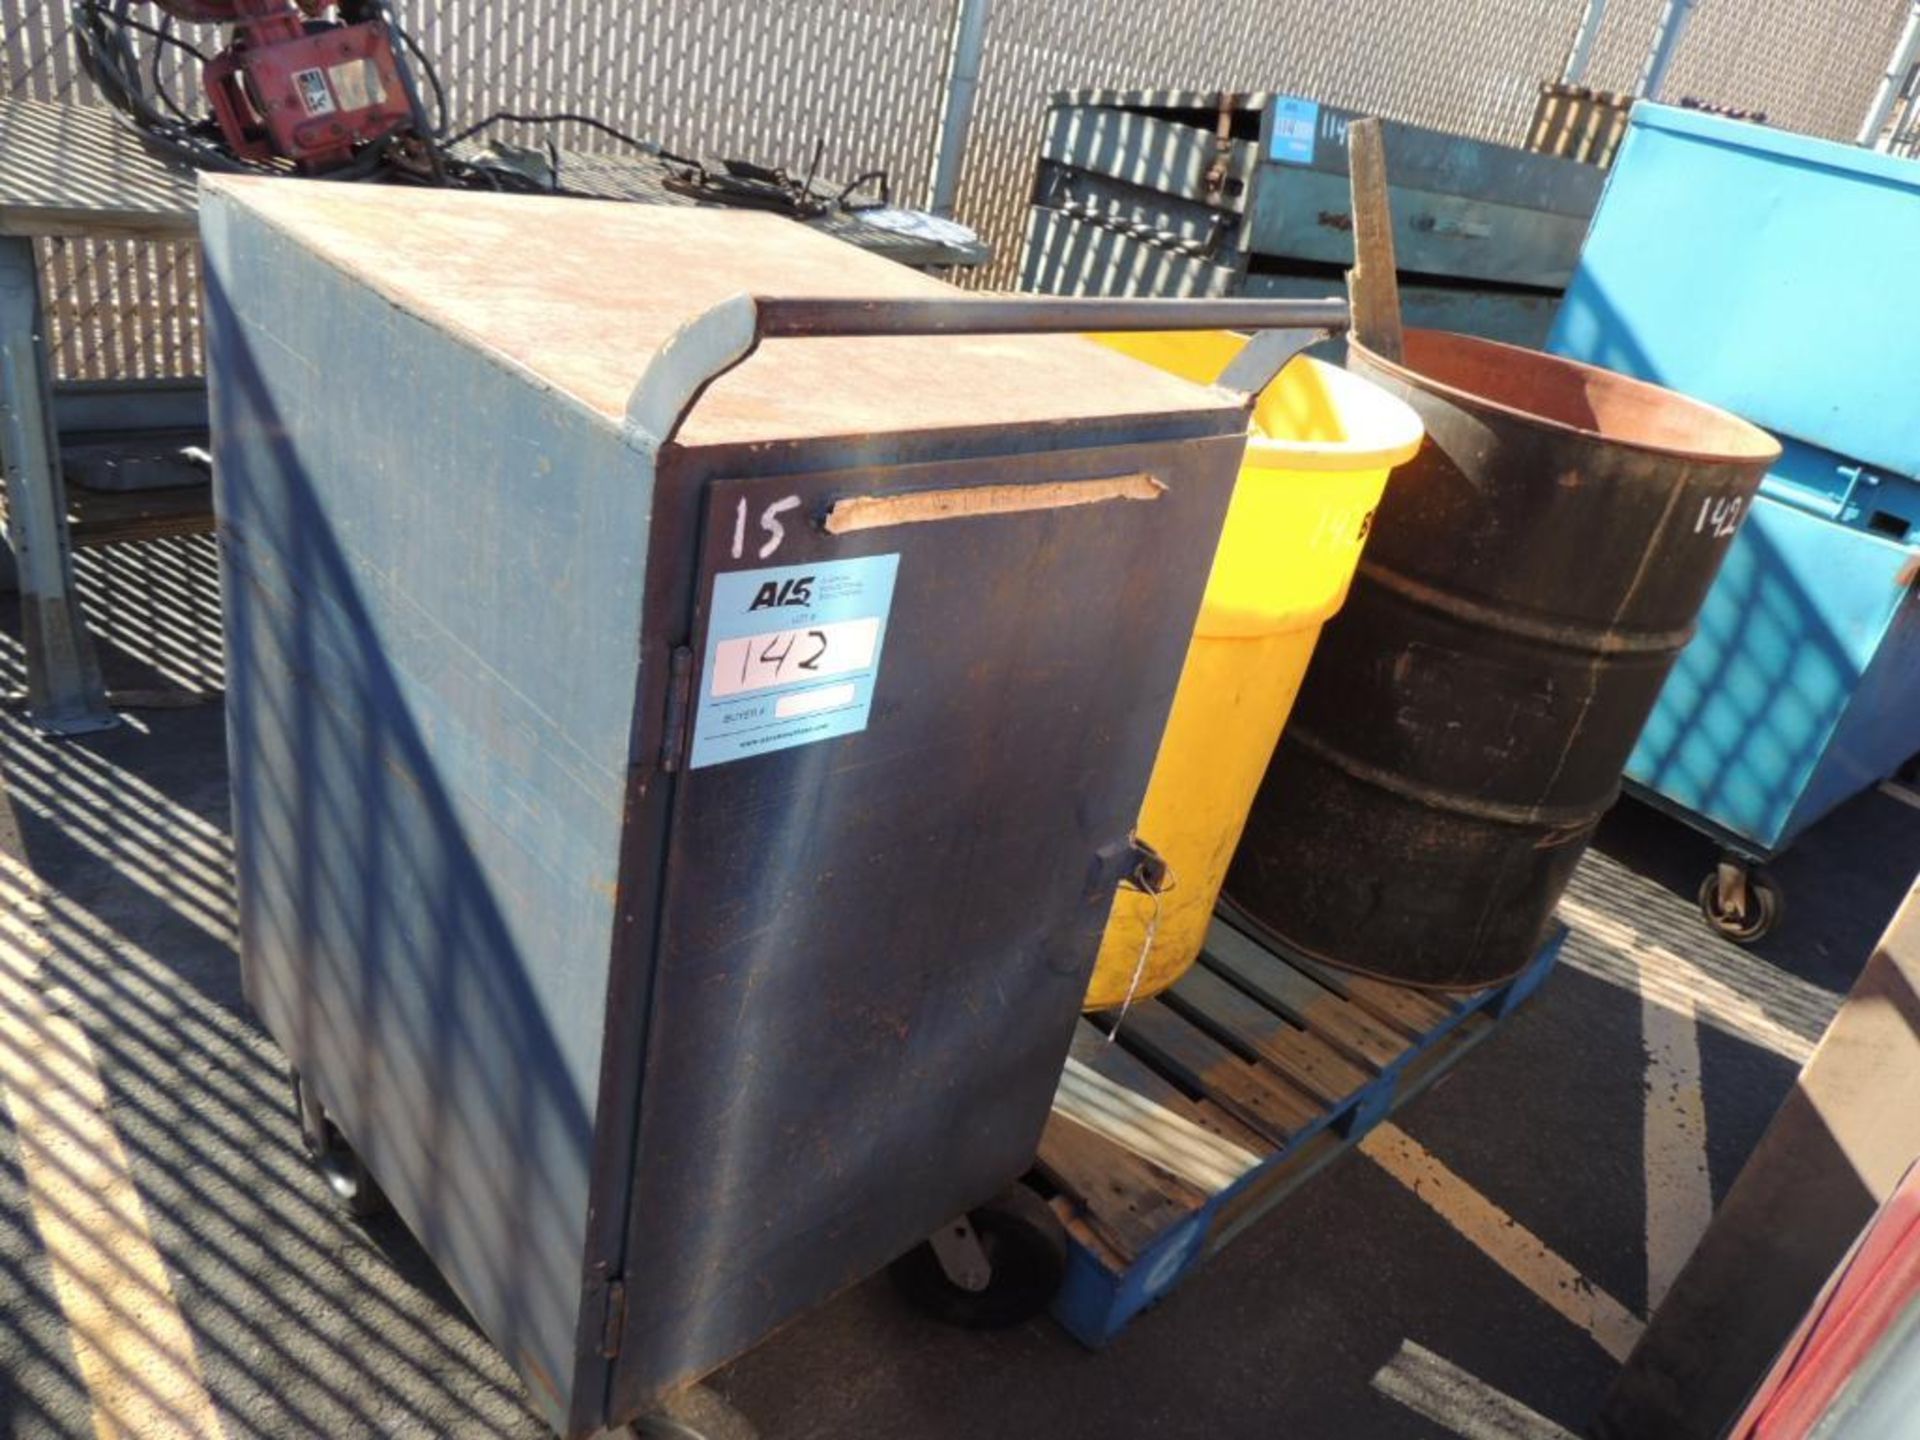 STEEL CABINET ON CASTERS, GARBAGE CAN FULL OF AIR TOOLS & WRENCHES